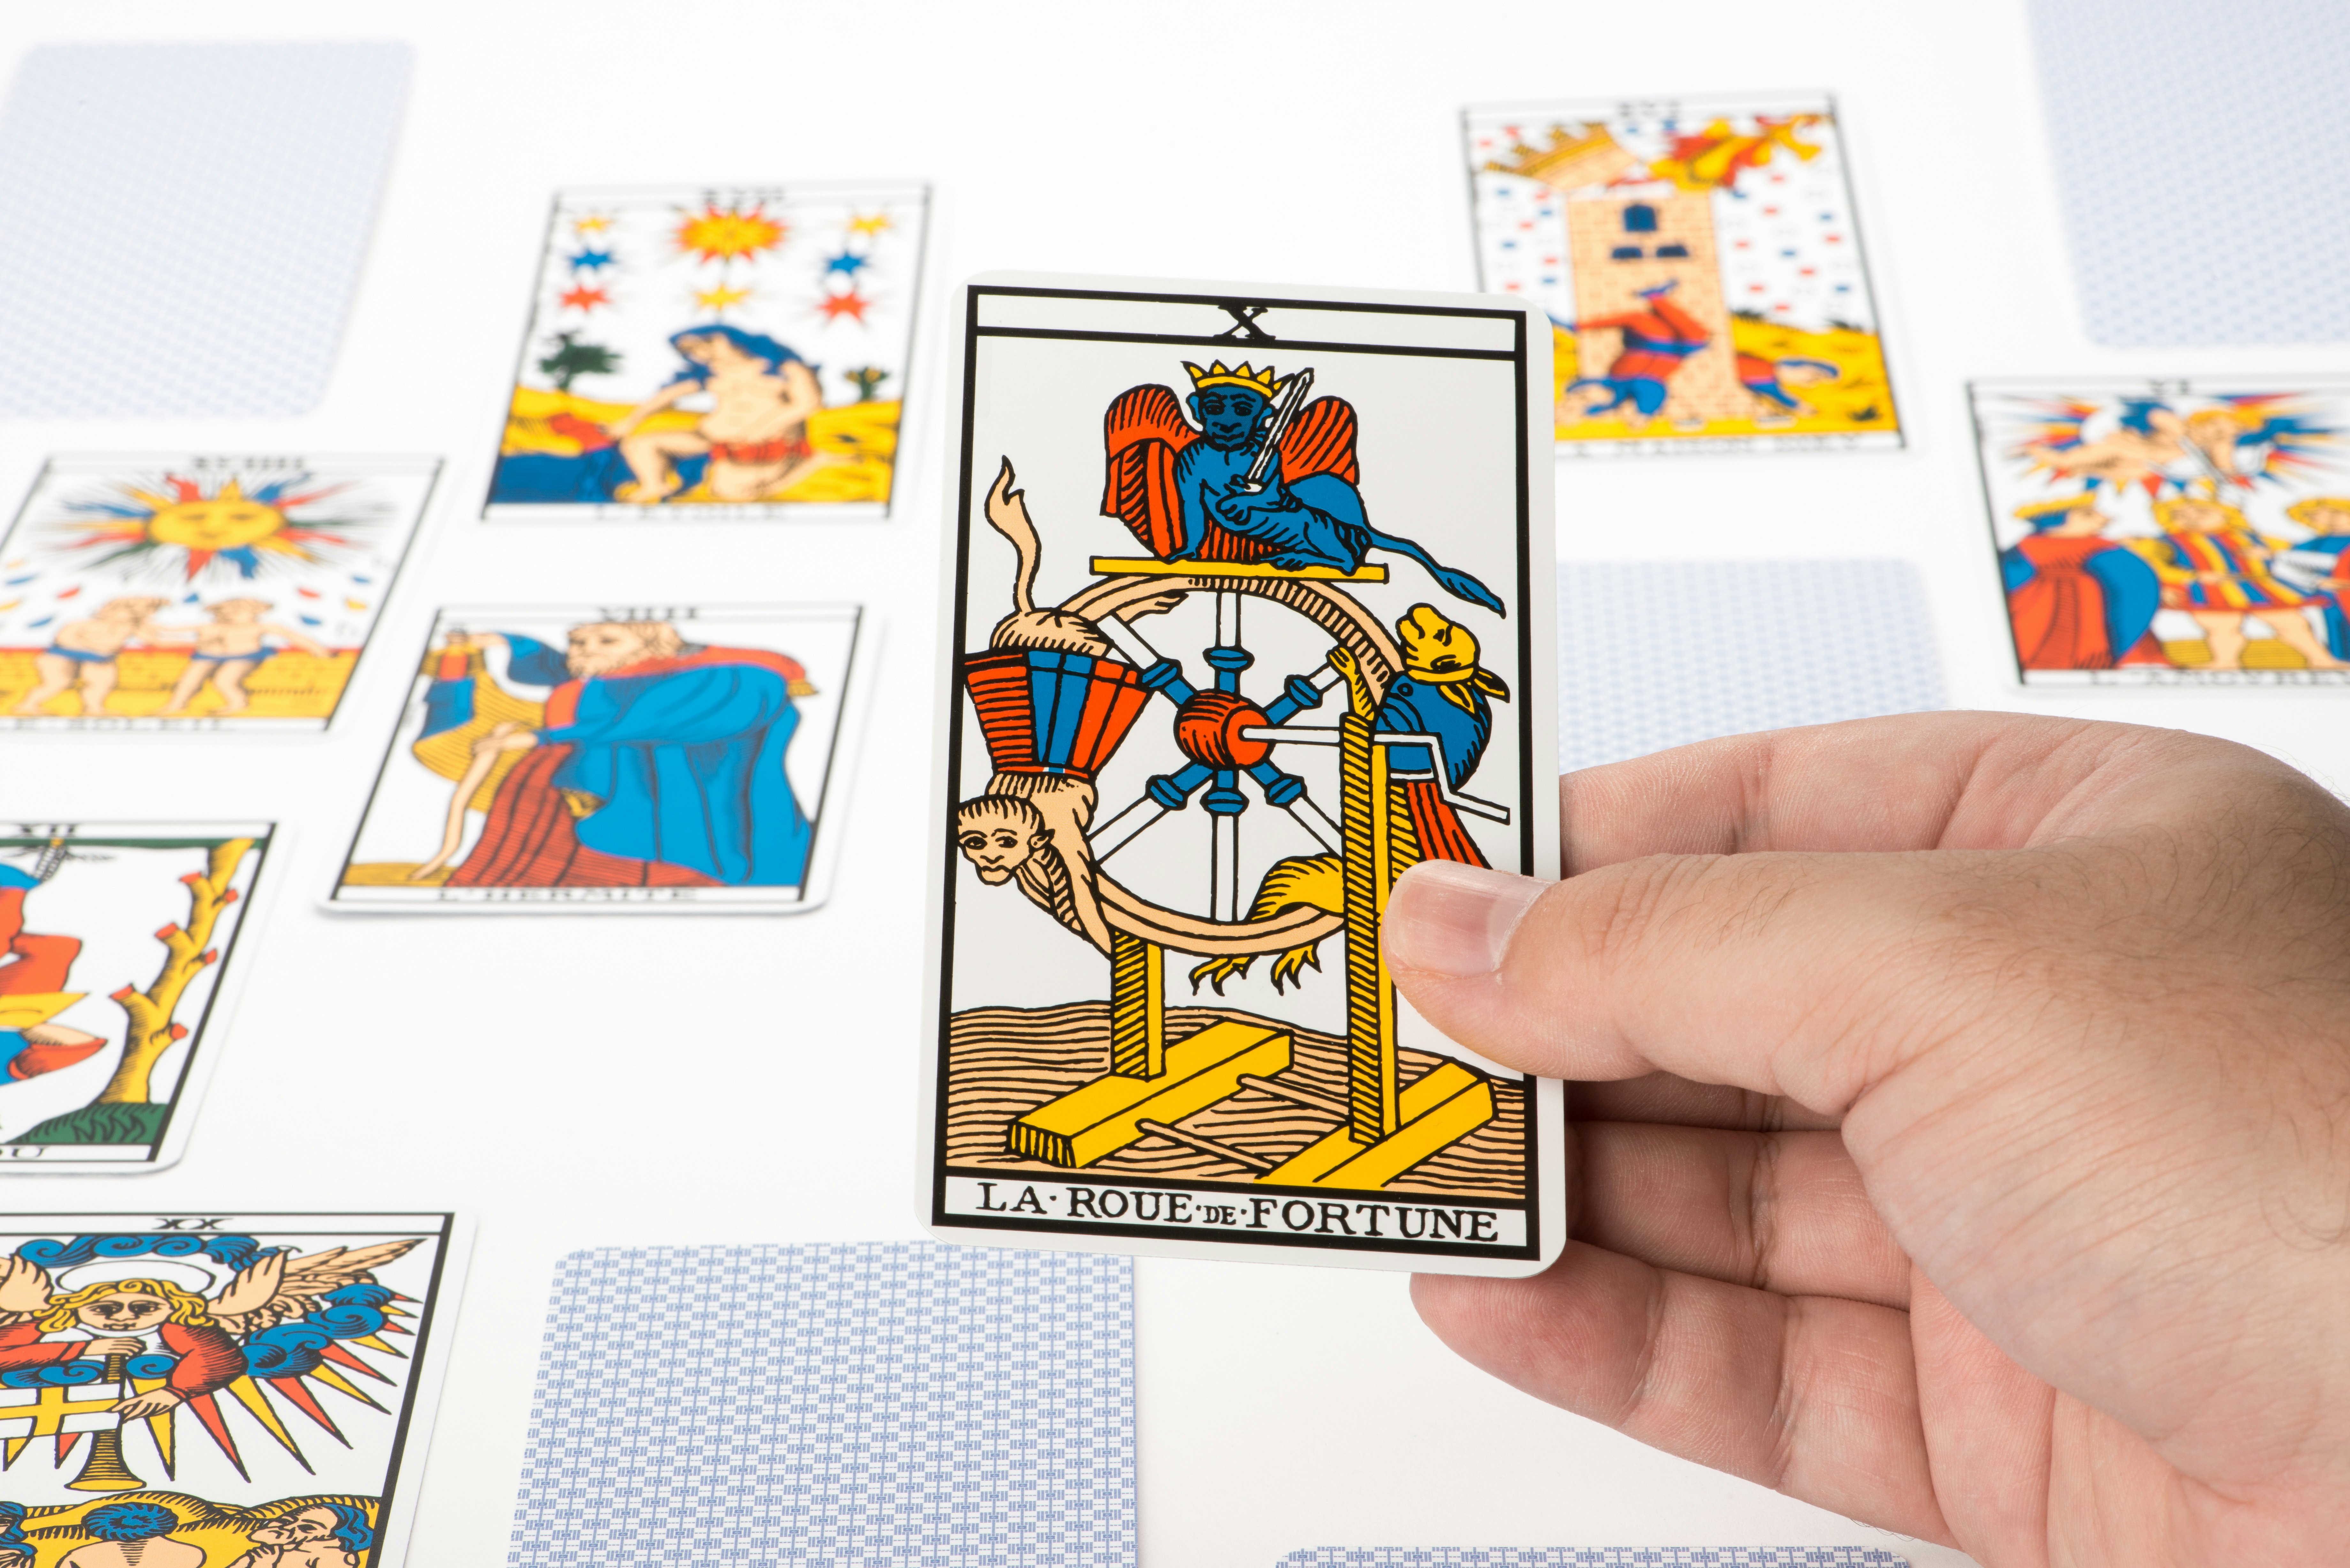 Do tarot cards work or are they just a TikTok trend? We got our